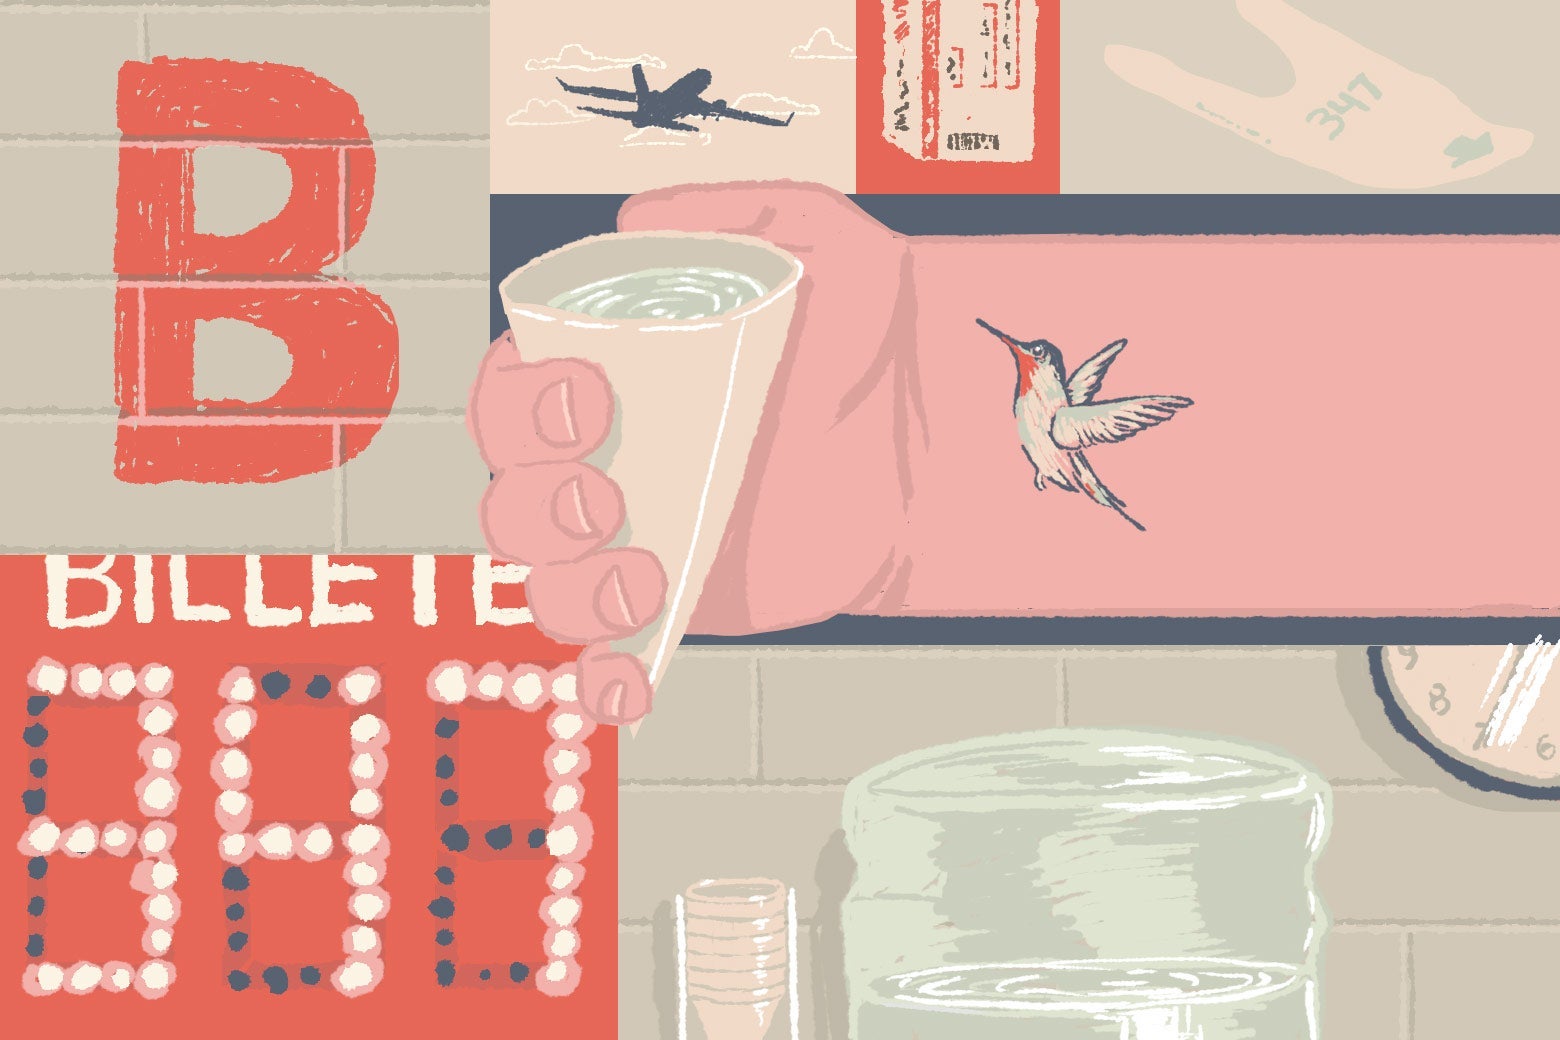 A collagelike illustration depicting: the letter B painted on a brick wall, a flying plane, an info booth and ticket, a hummingbird near a hand holding a watercooler cup, a watercooler near a clock and a stack of cups, and a board showing the number 347.